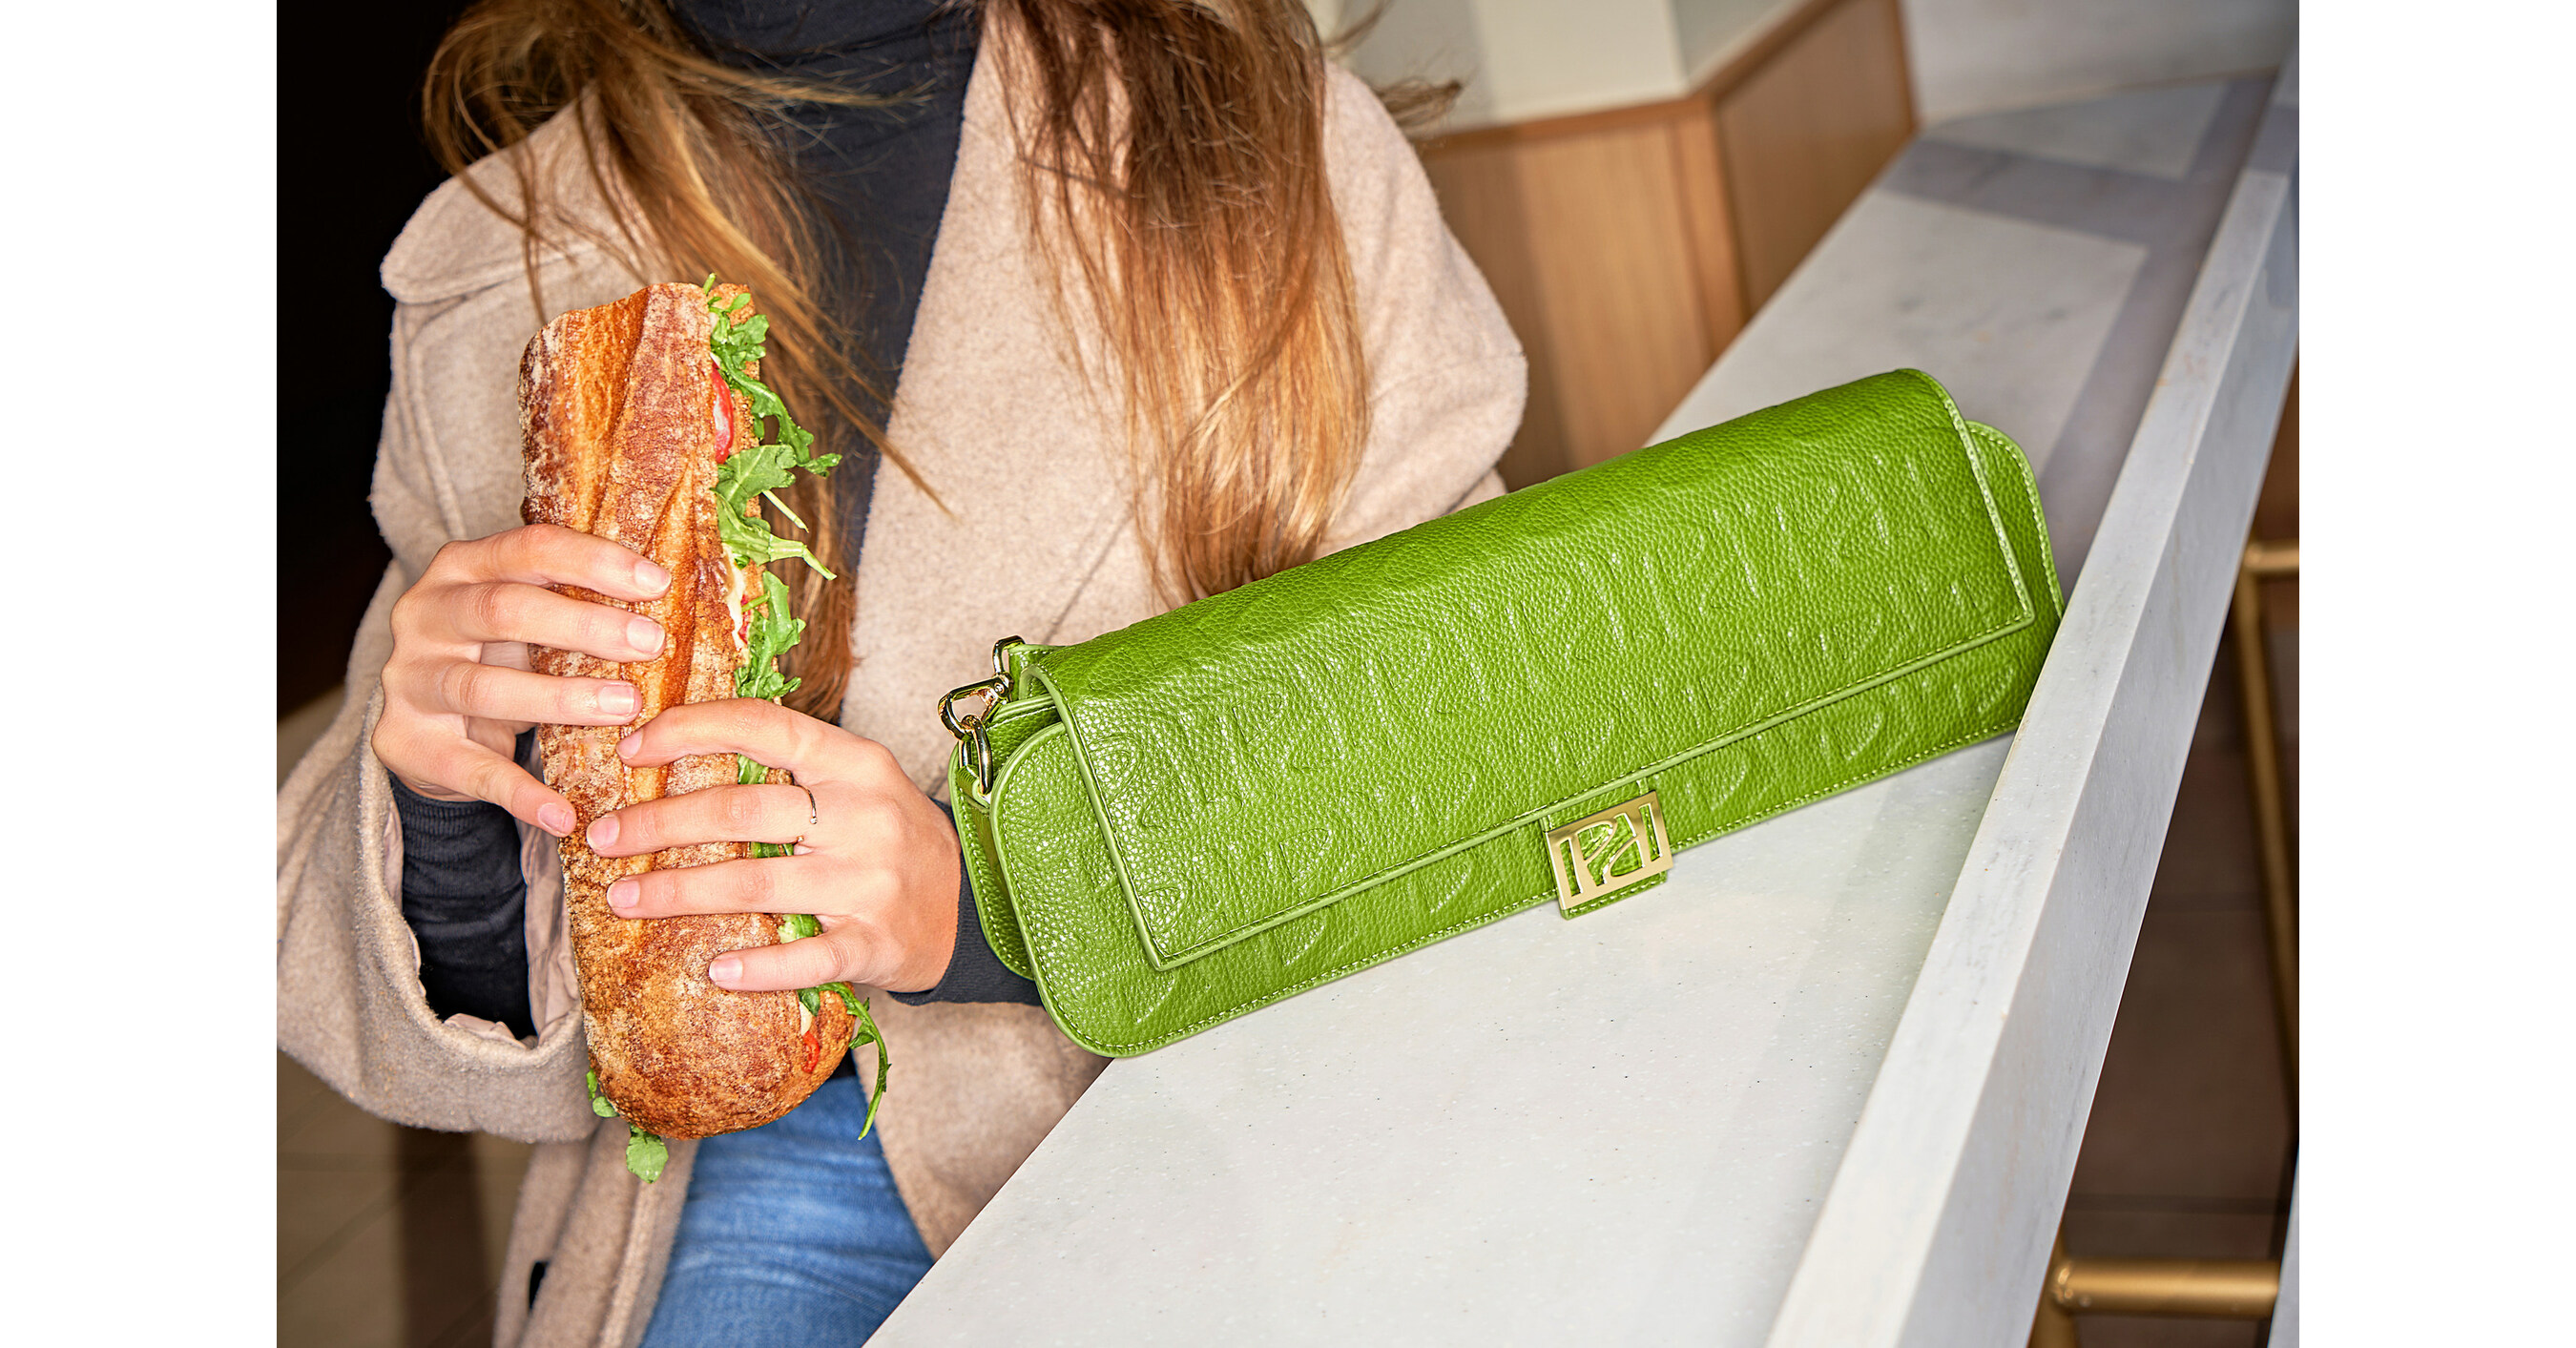 Baguette bags have made a comeback - The Mail